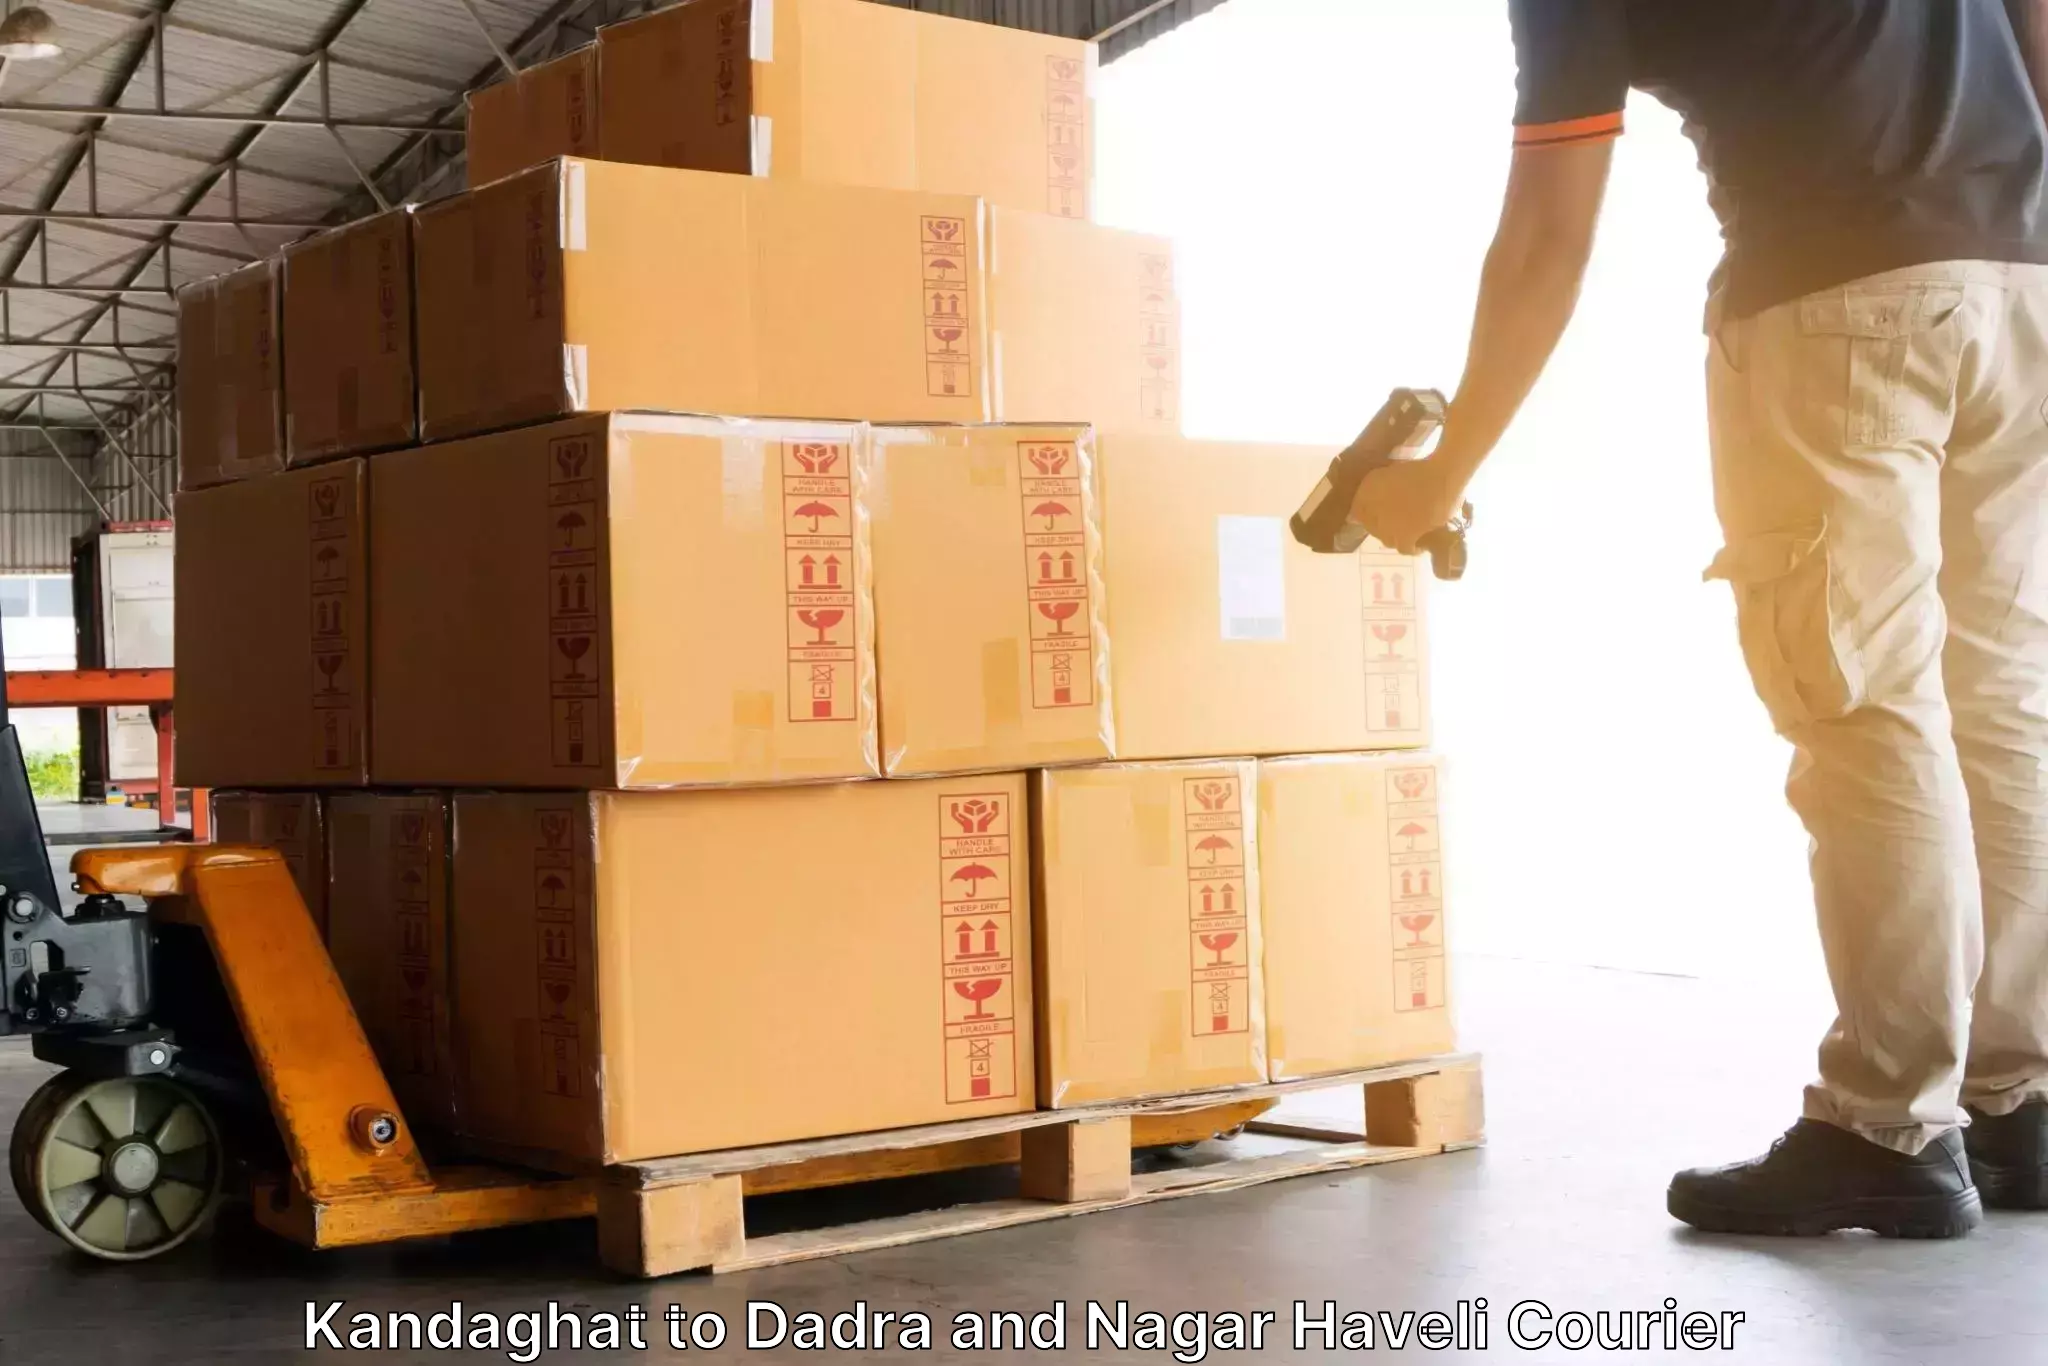 Efficient parcel tracking Kandaghat to Dadra and Nagar Haveli